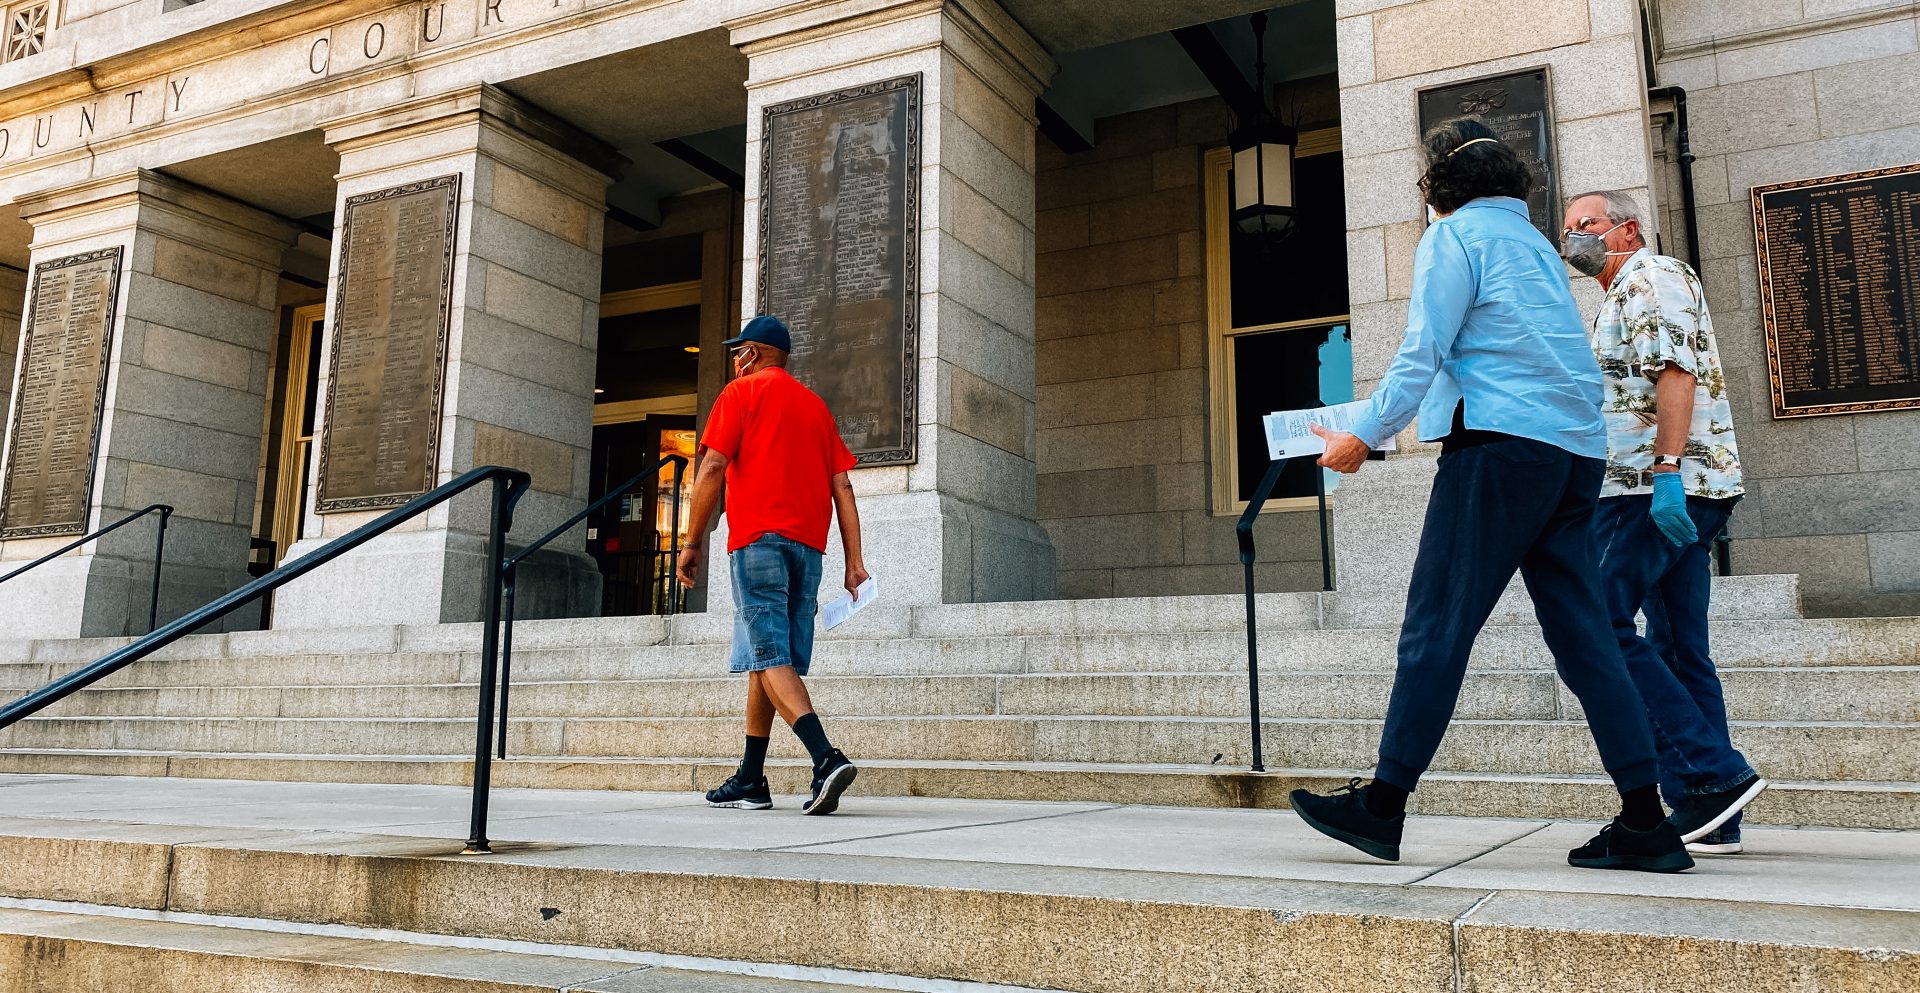 FILE PHOTO: Voters walk along the steps of the York County Courthouse on June 1, 2020, to deposit their ballots in a drop box ahead of the Pennsylvania primary.